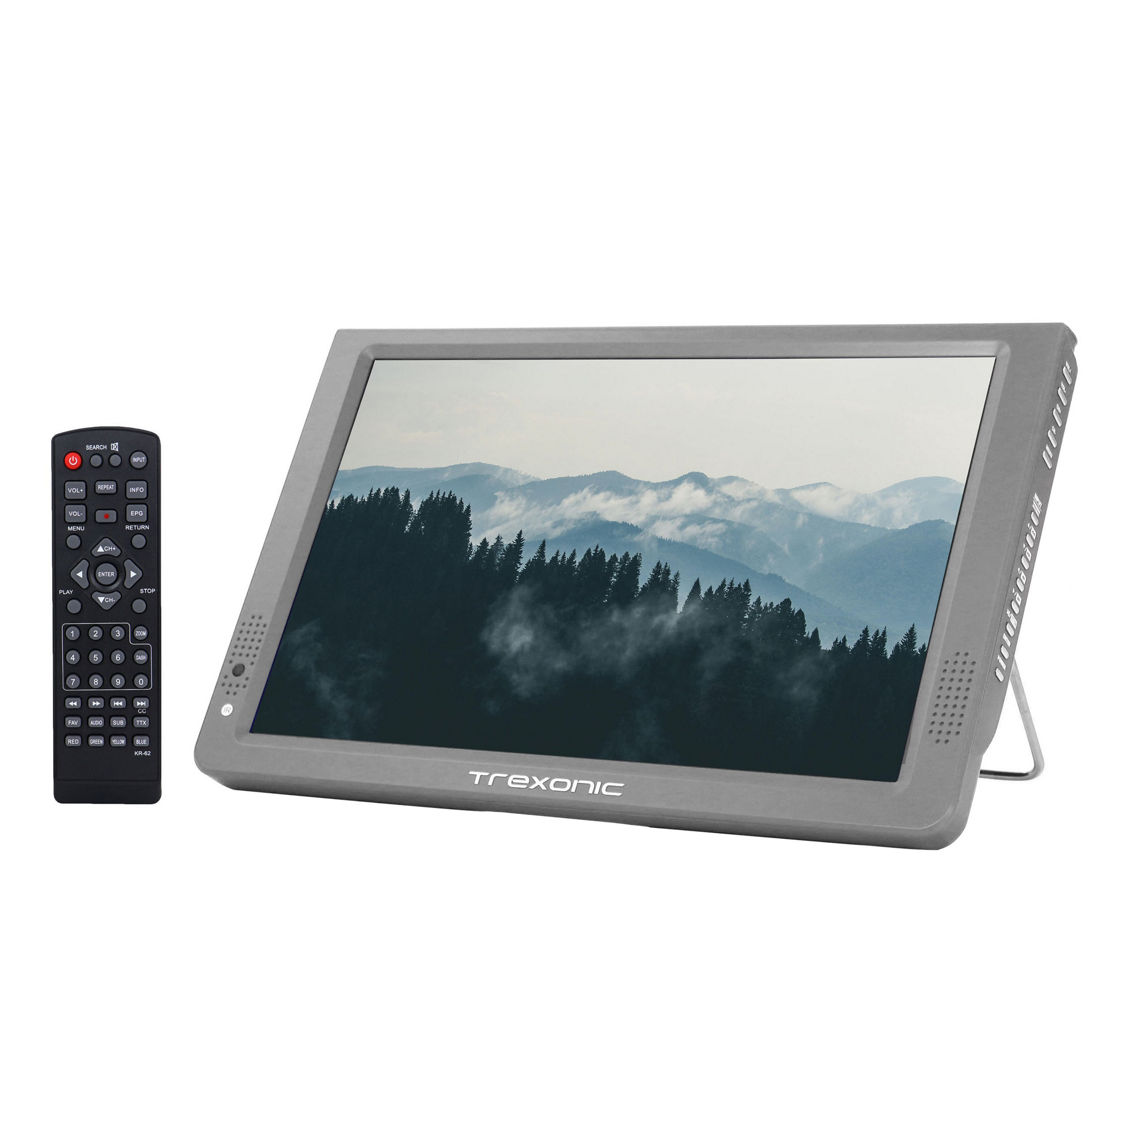 Trexonic Portable Rechargeable 14 Inch LED TV with HDMI, SD/MMC, USB, VGA, AV In - Image 2 of 2